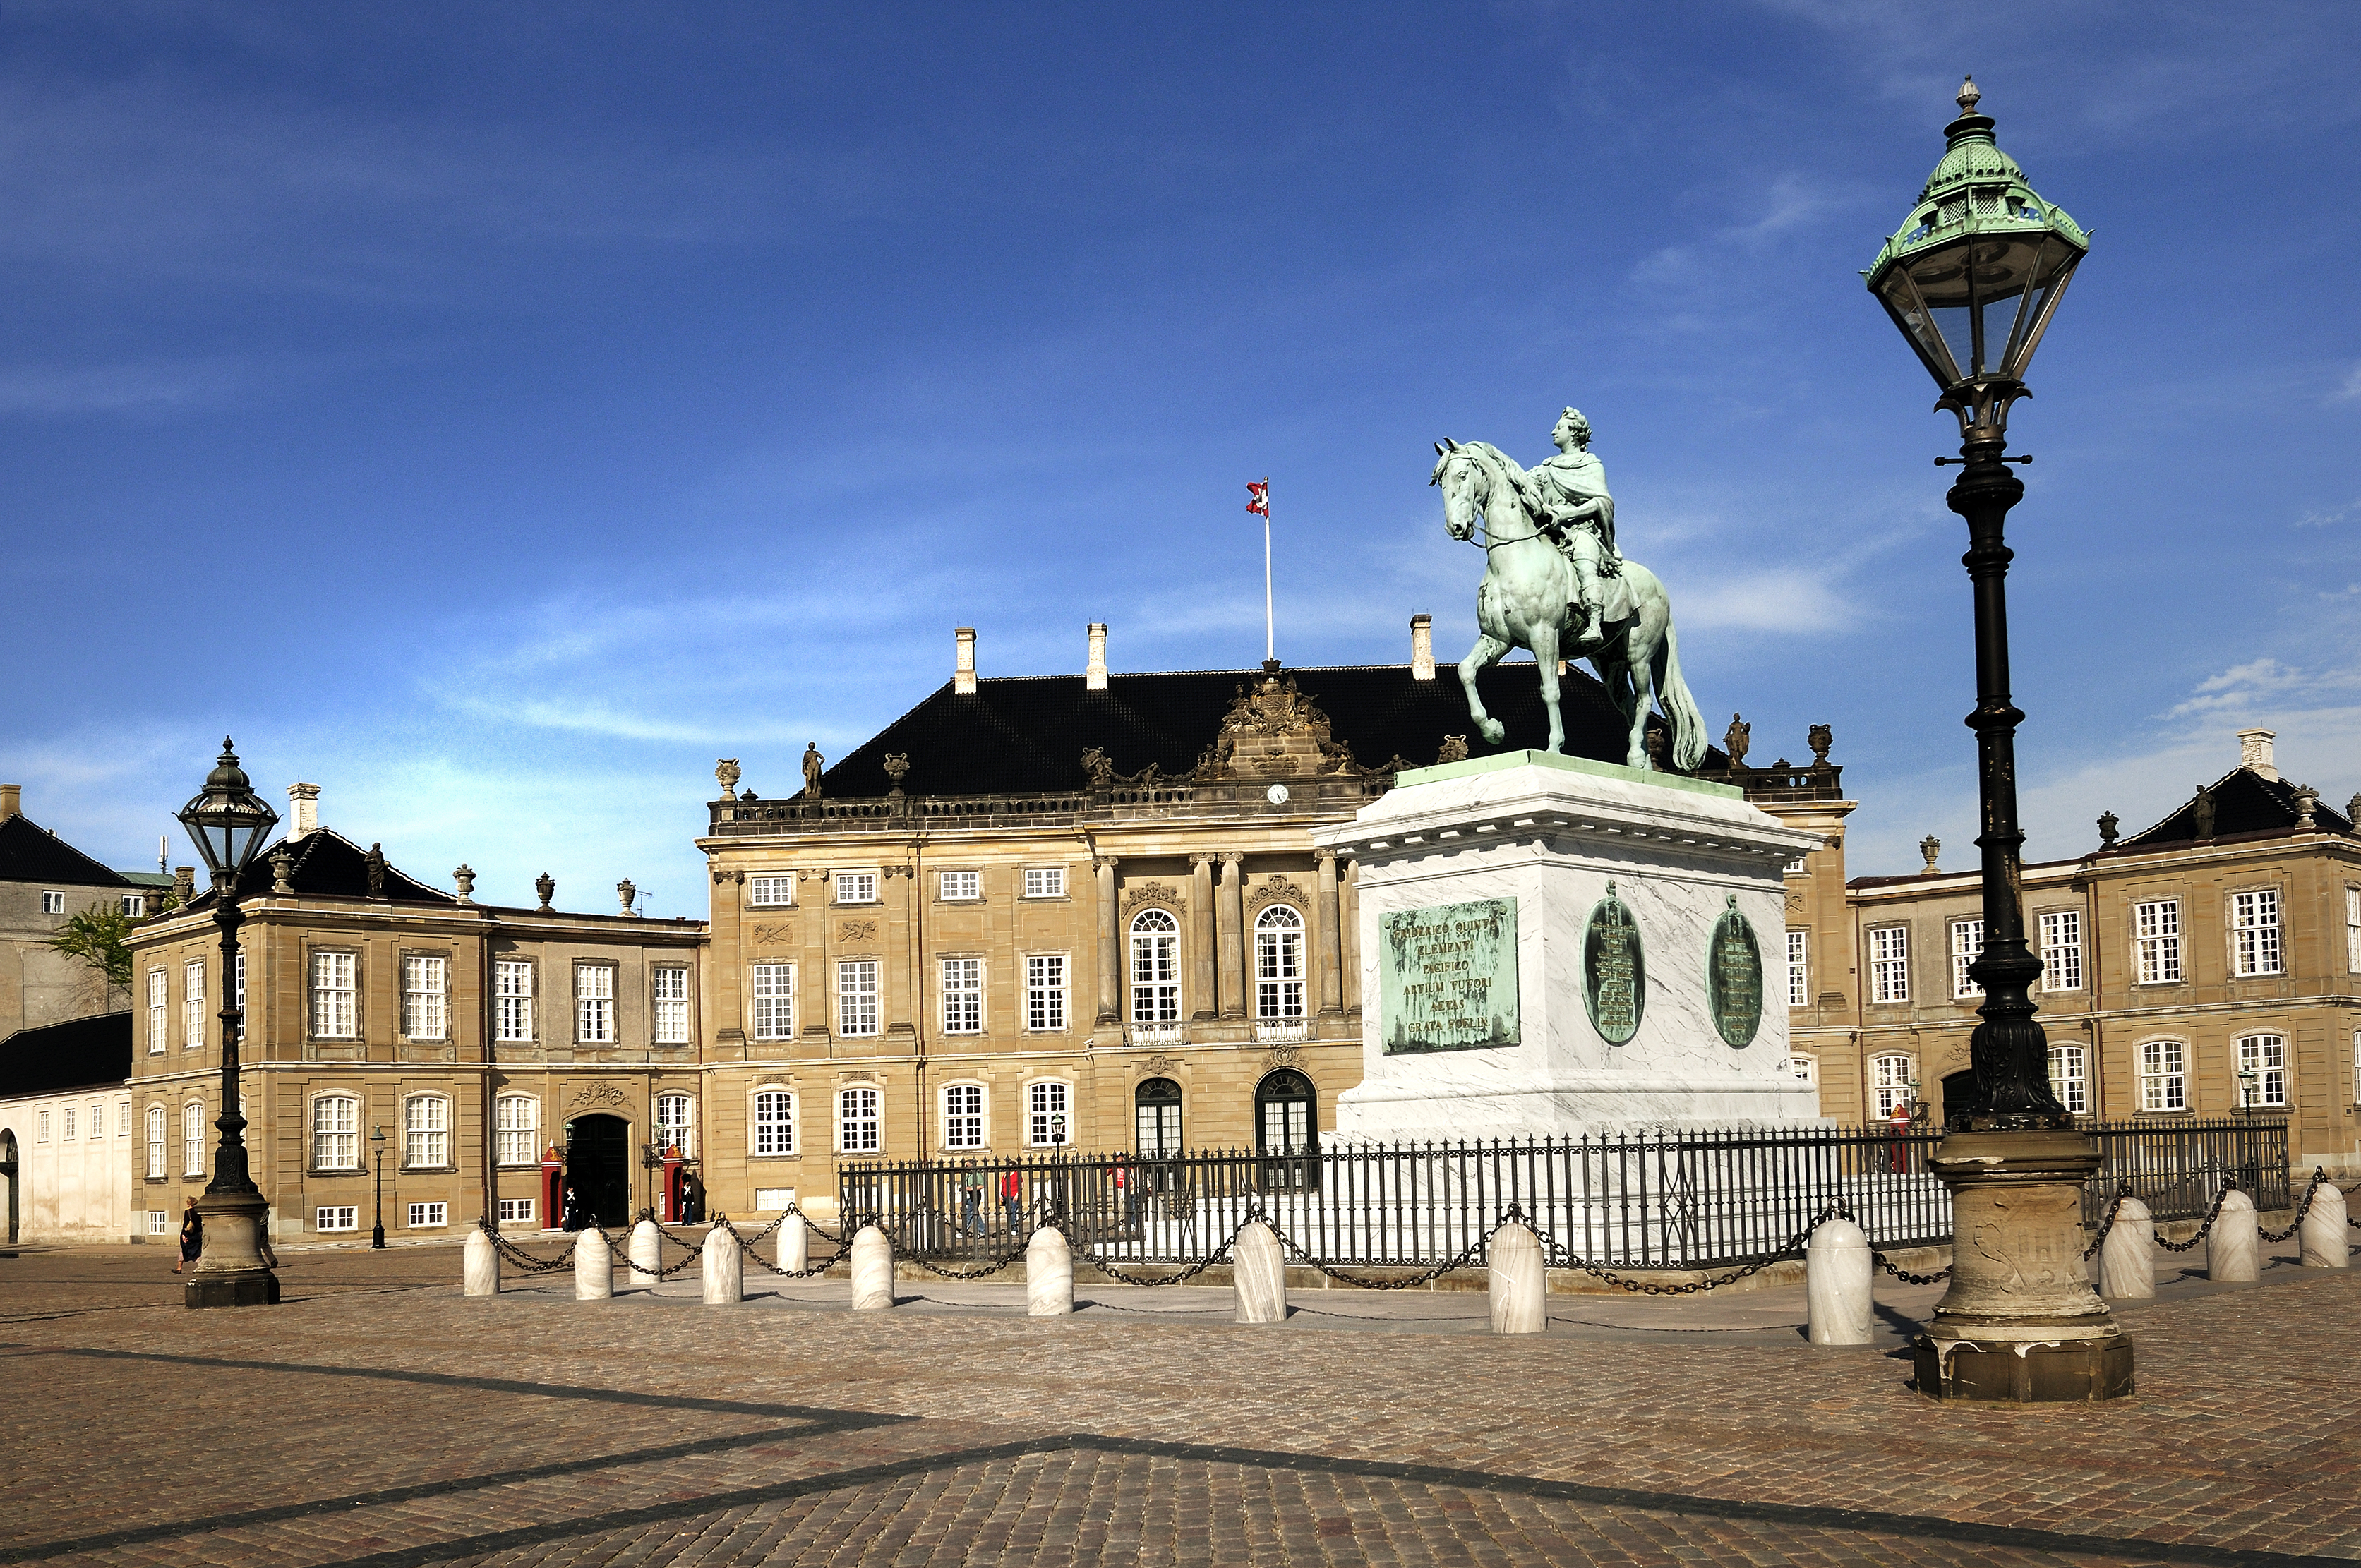 Amalienborg Palace attraction reviews - Amalienborg Palace tickets - Amalienborg Palace discounts - Amalienborg Palace transportation, address, opening hours - attractions, hotels, and food near Amalienborg Palace - Trip.com